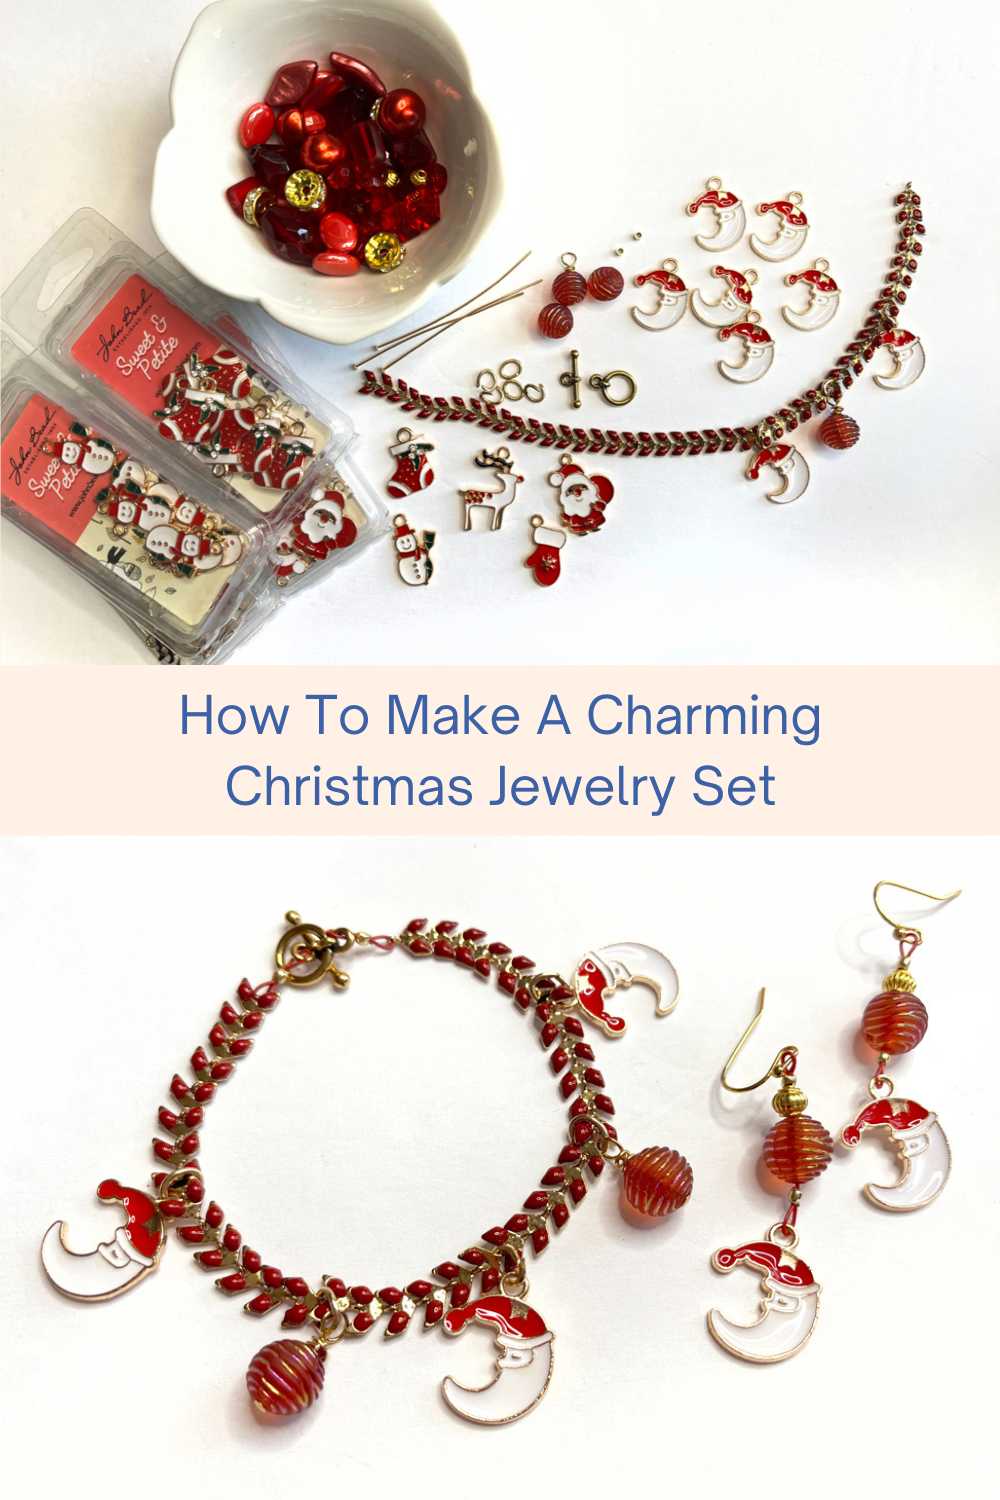 How To Make A Charming Christmas Jewelry Set Collage